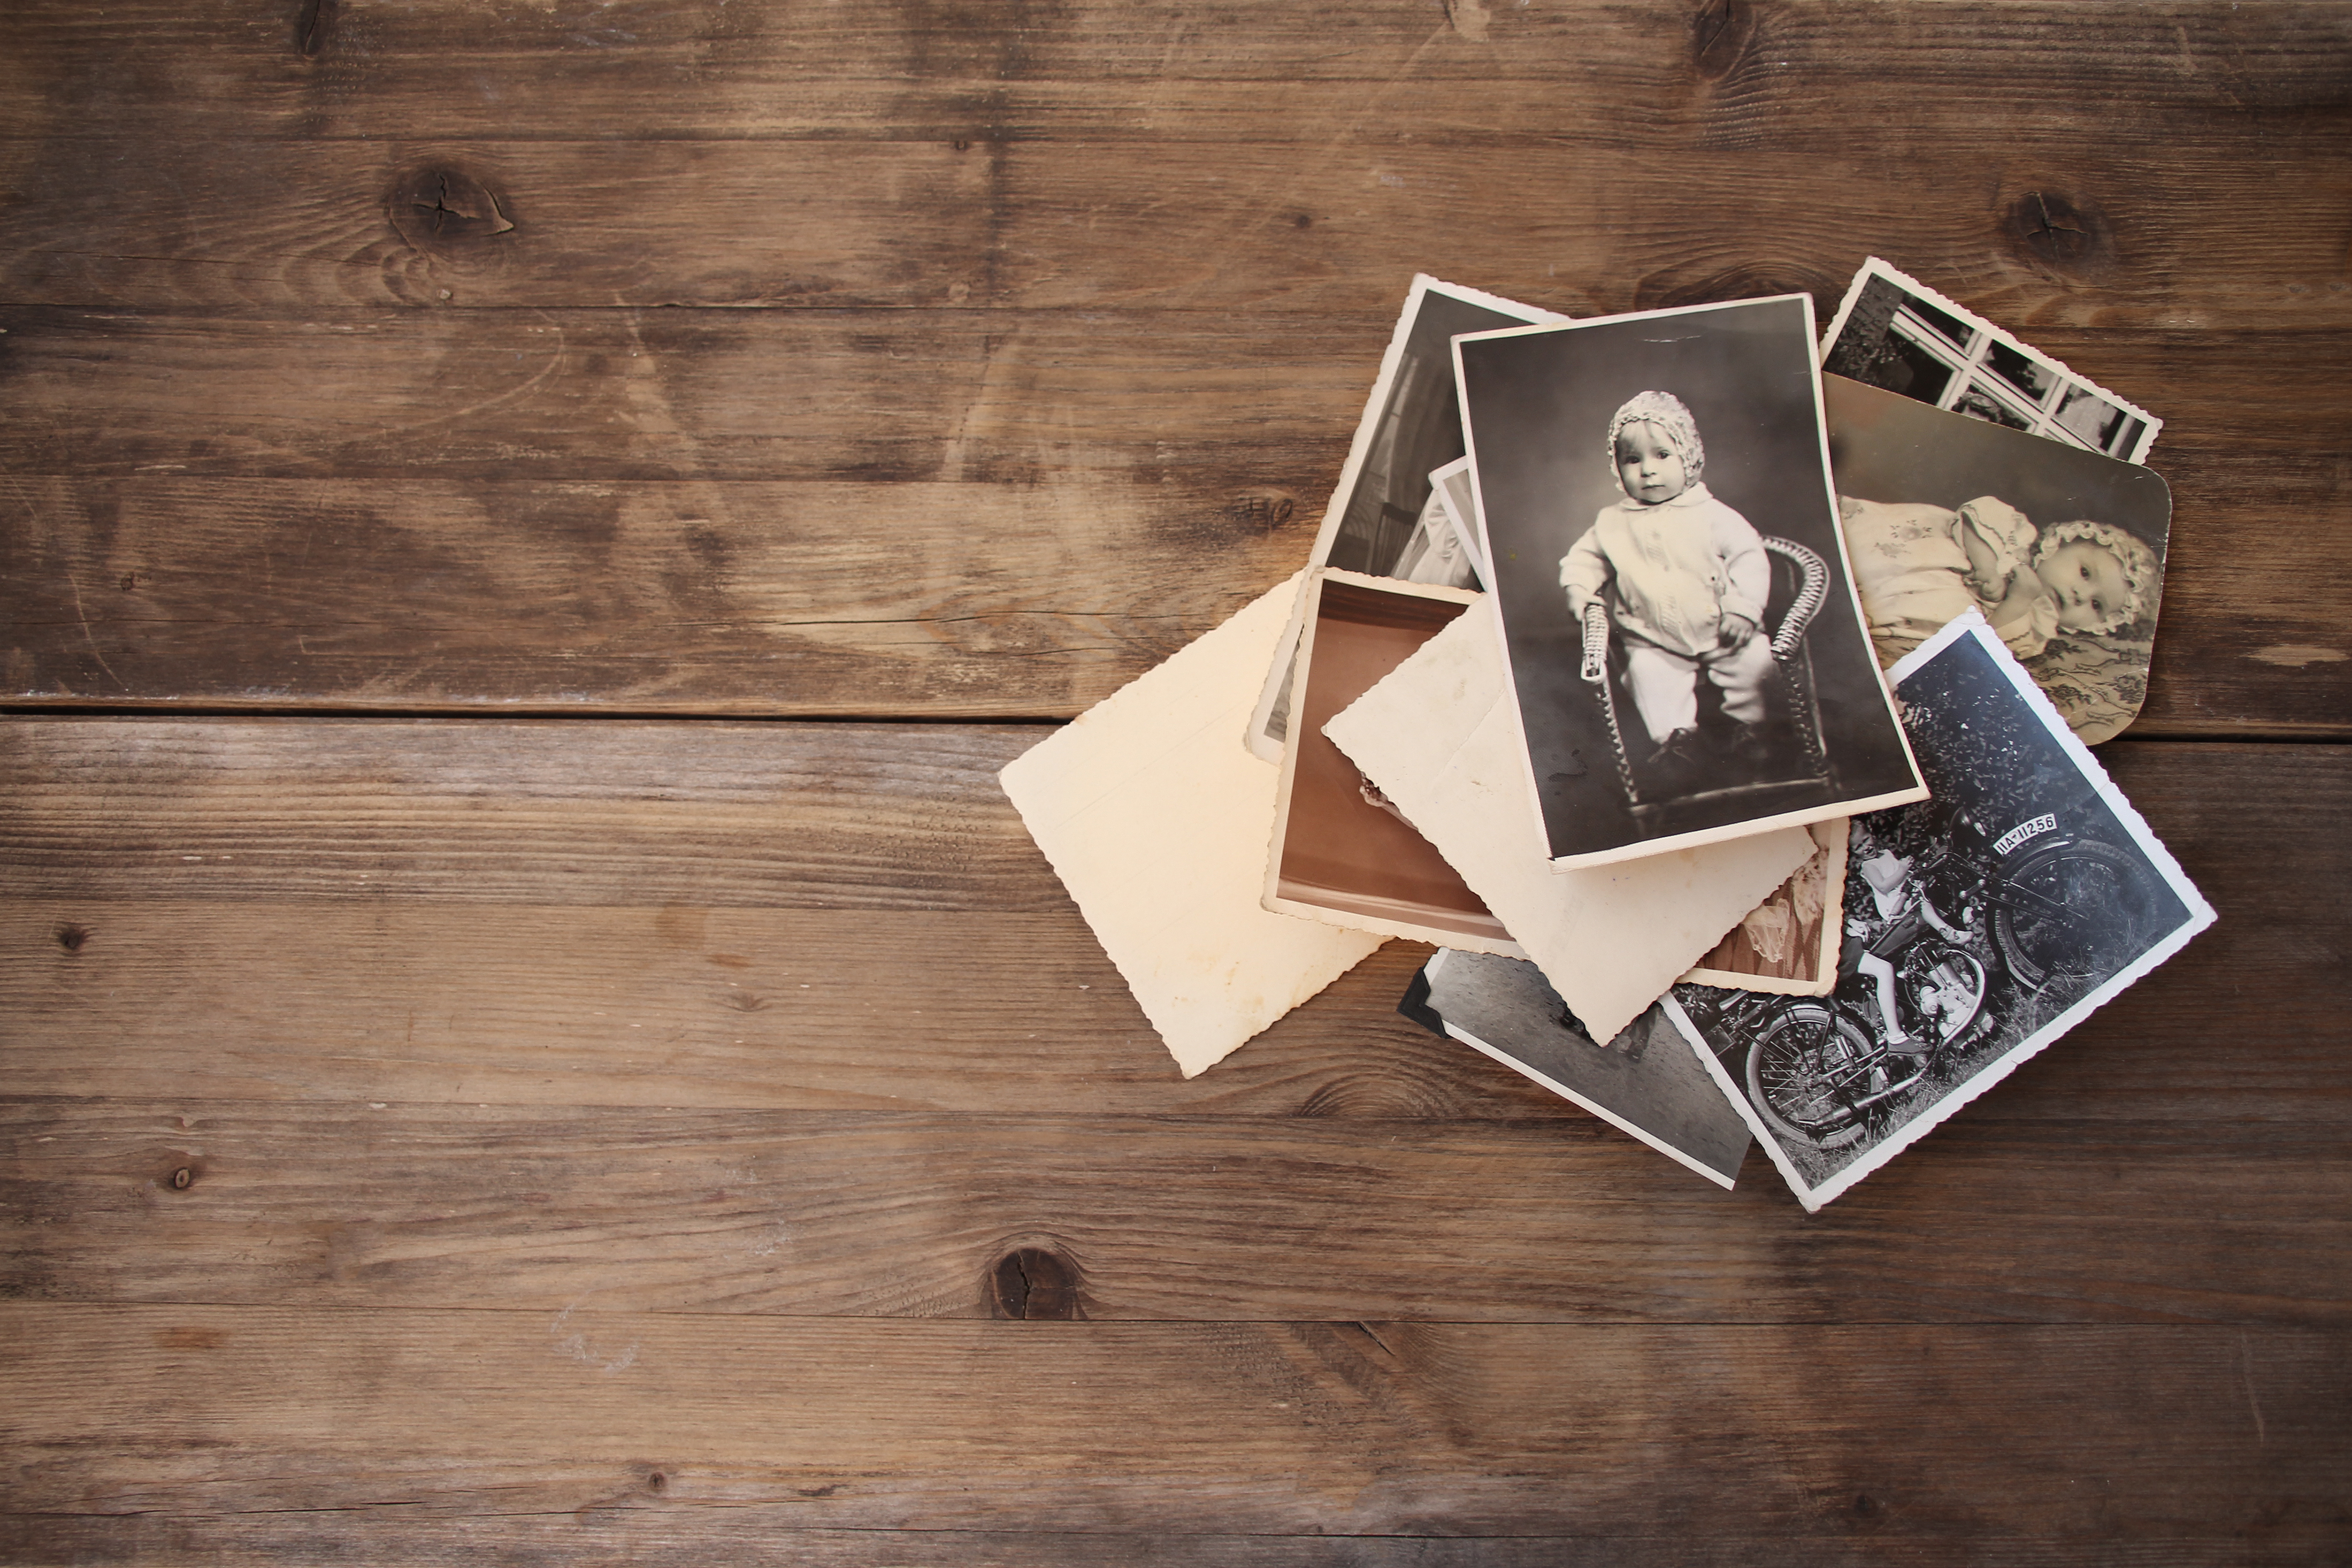 A stack of old photos | Source: Shutterstock